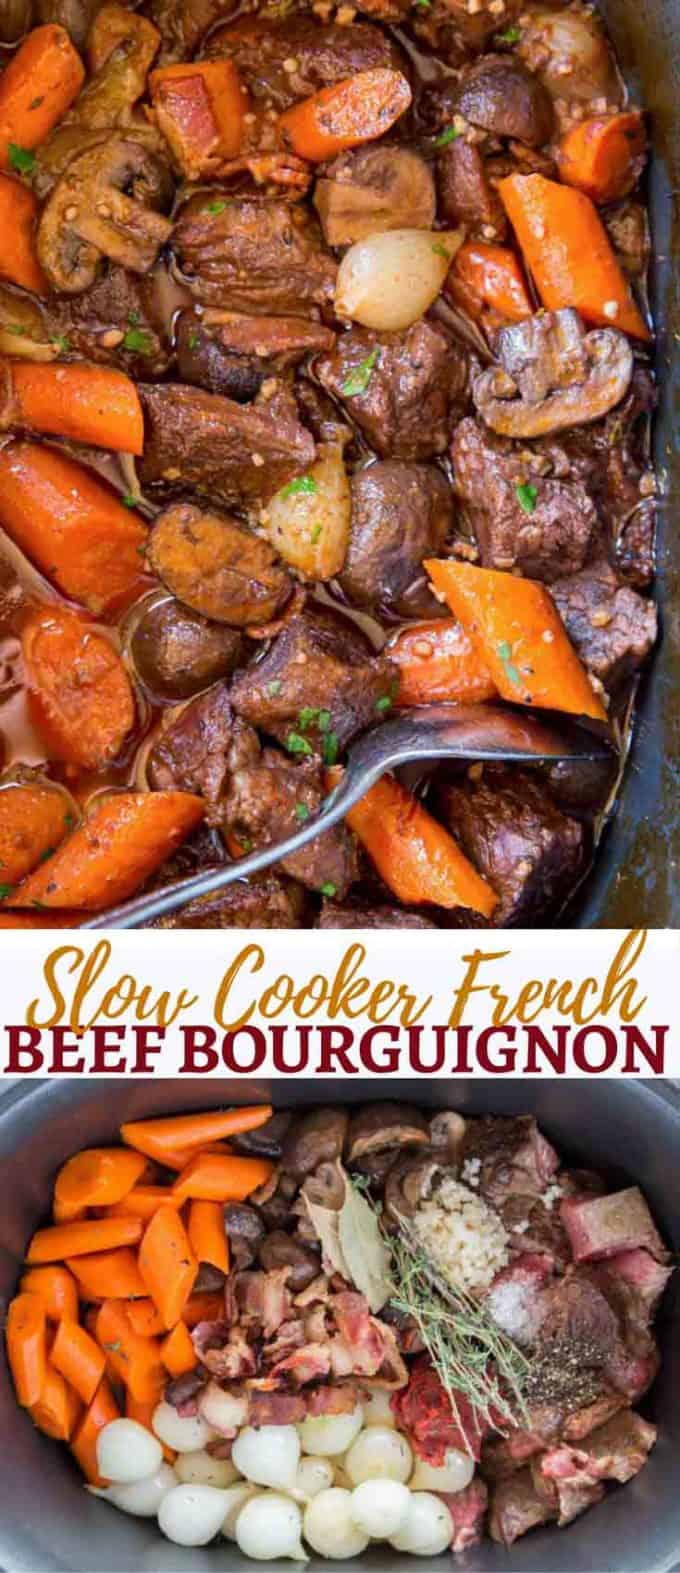 Slow Cooker Beef Bourguignon with all the delicious classic French flavors of beef, red wine, mushrooms and bacon made in your slow cooker.